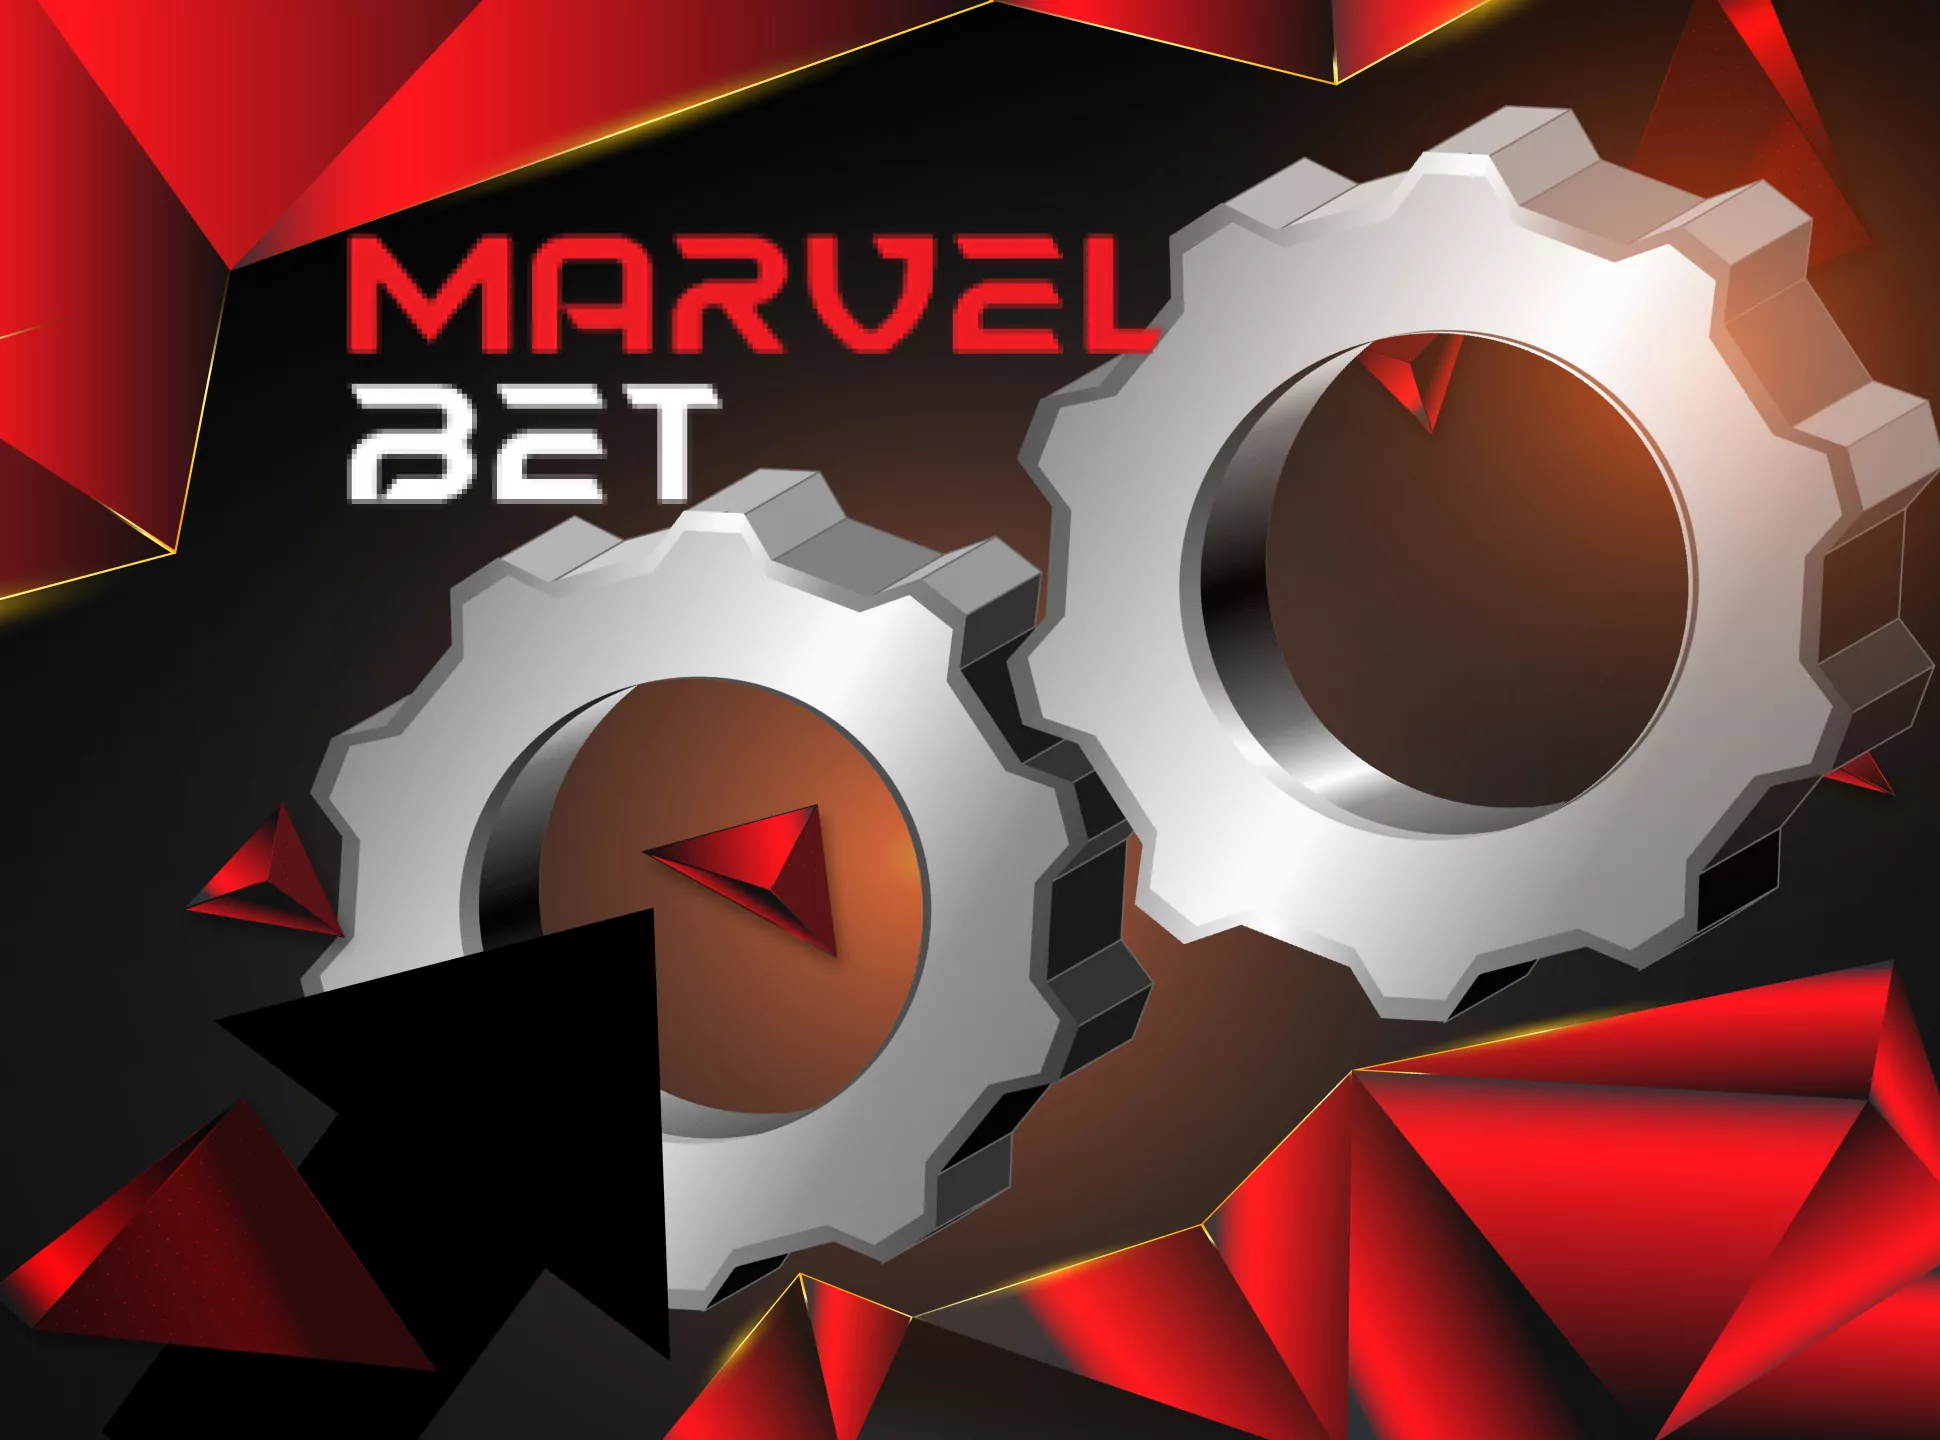 The Marvelbet is updated automatically.